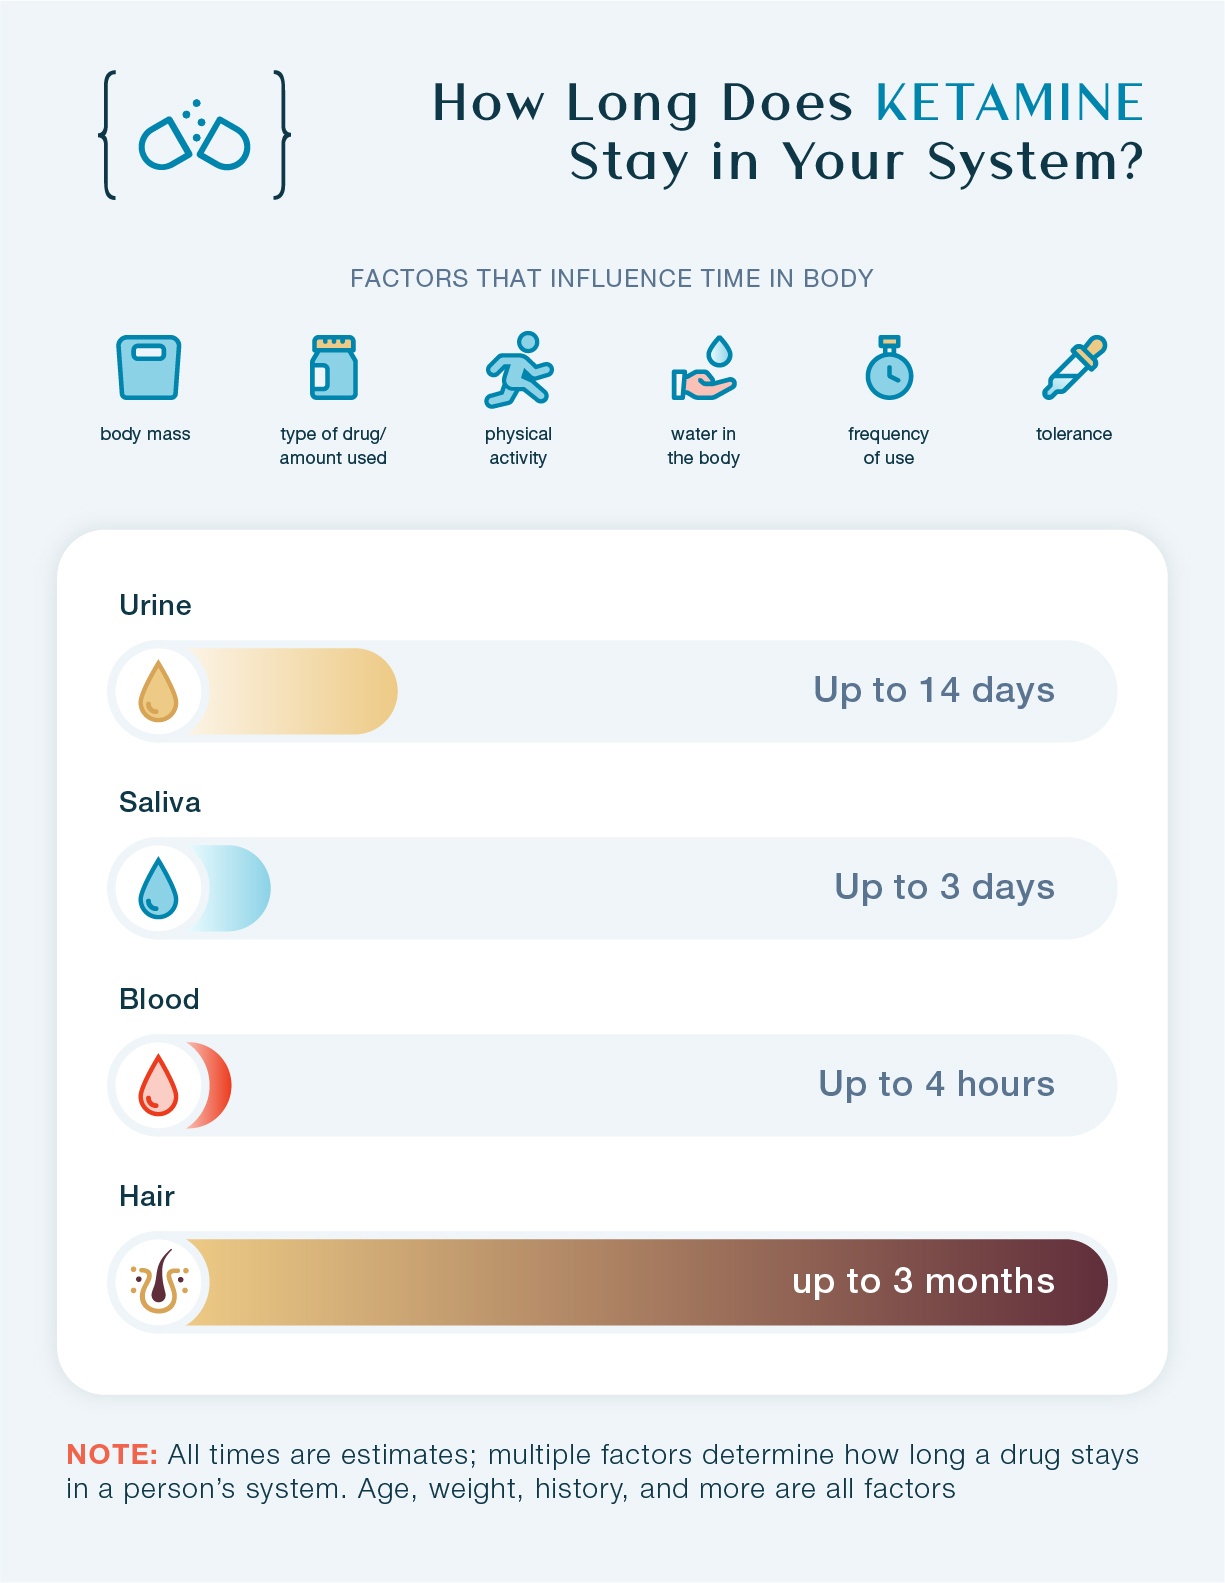 How long does Ketamine stay in your system? This chart shows how long Ketamine stays in urine, saliva, blood, and hair